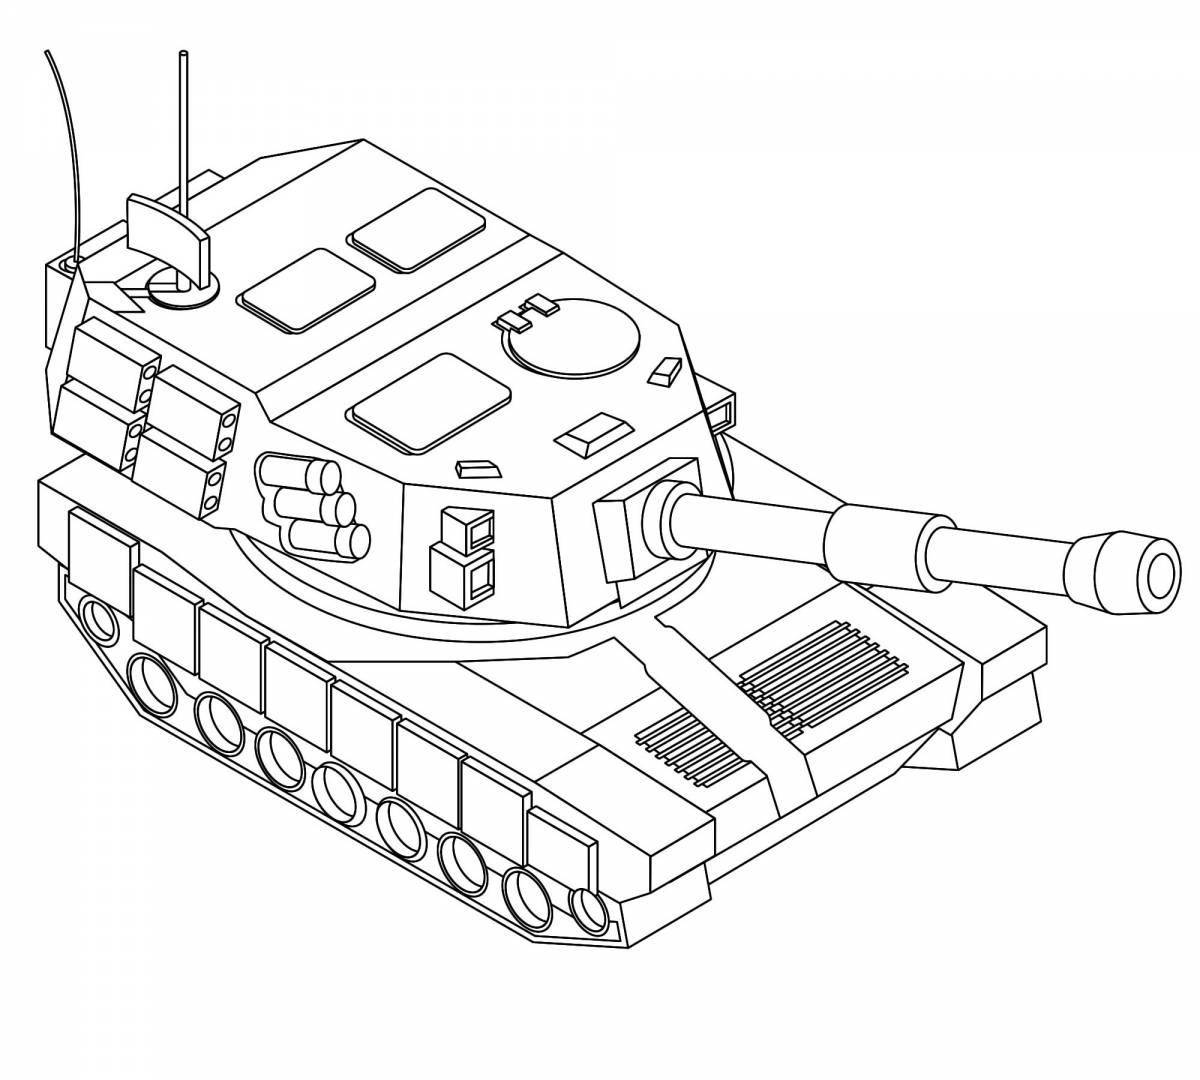 Dazzling tank t 90 coloring book